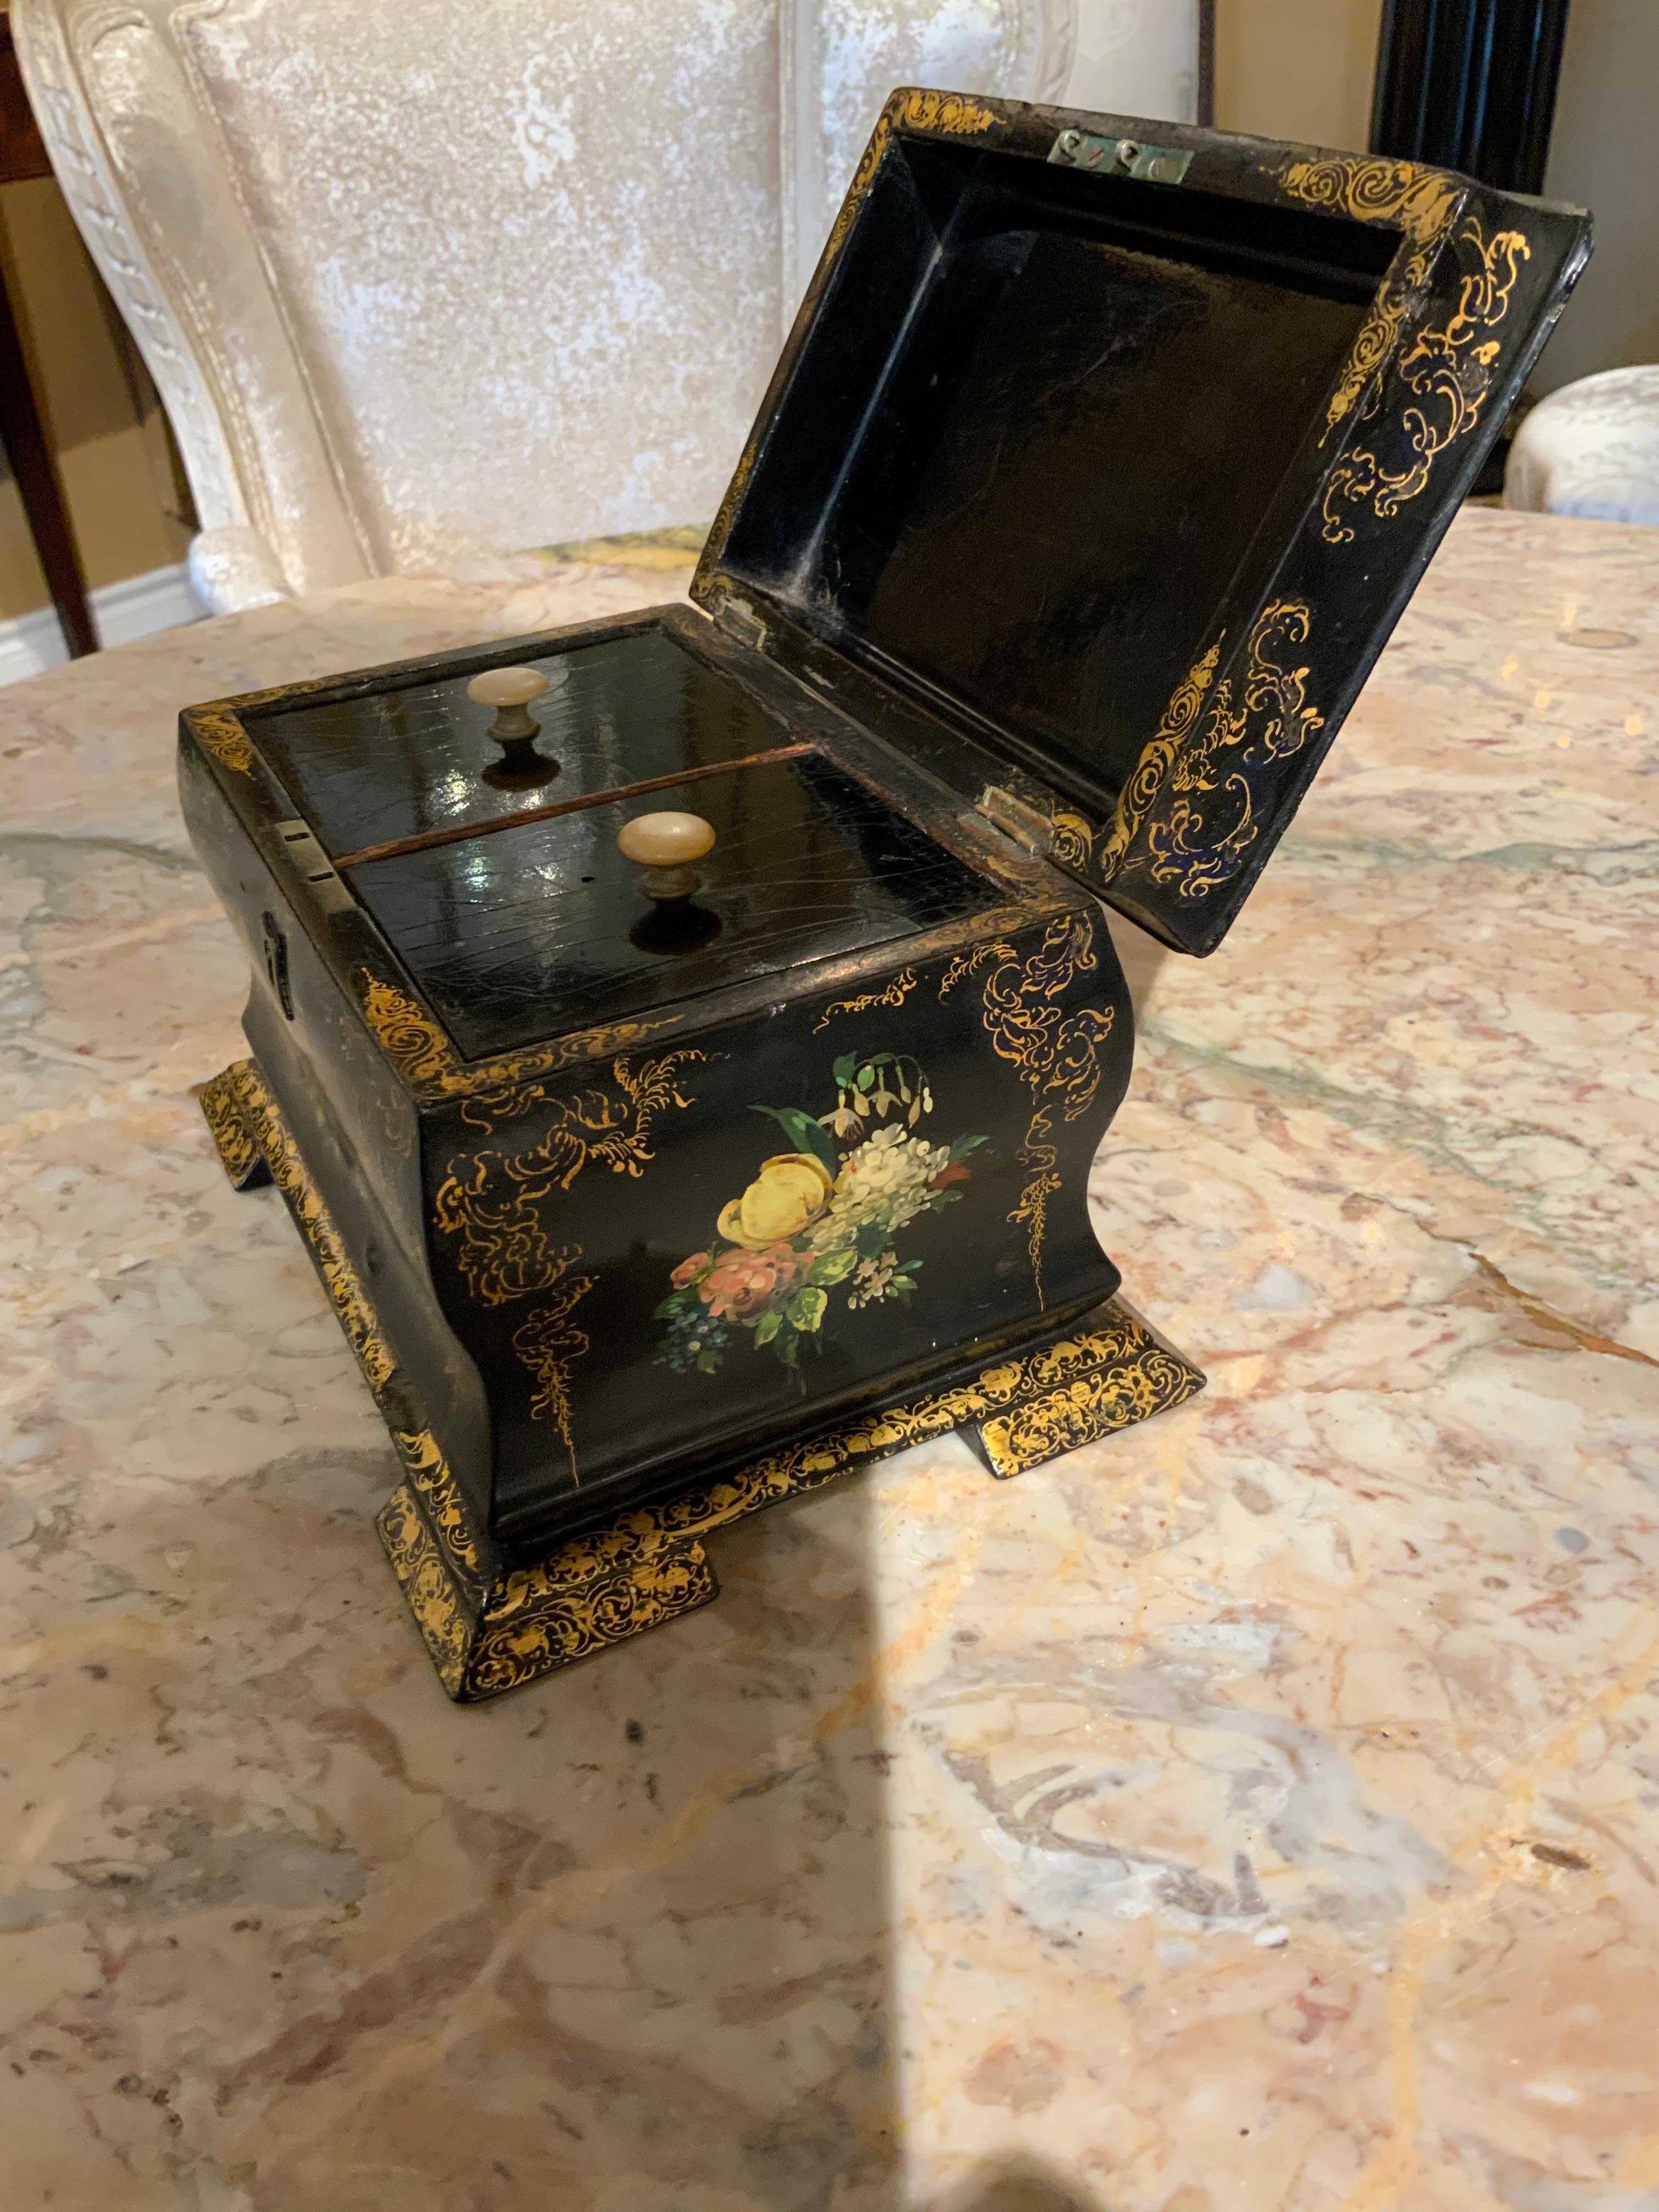 Exquisite quality with exceptional workmanship and art. Floral designs are painted on all
Sides of this tea caddie. It sits on bracketed feet. Provenance: the estate of Mrs. Henry Ford.